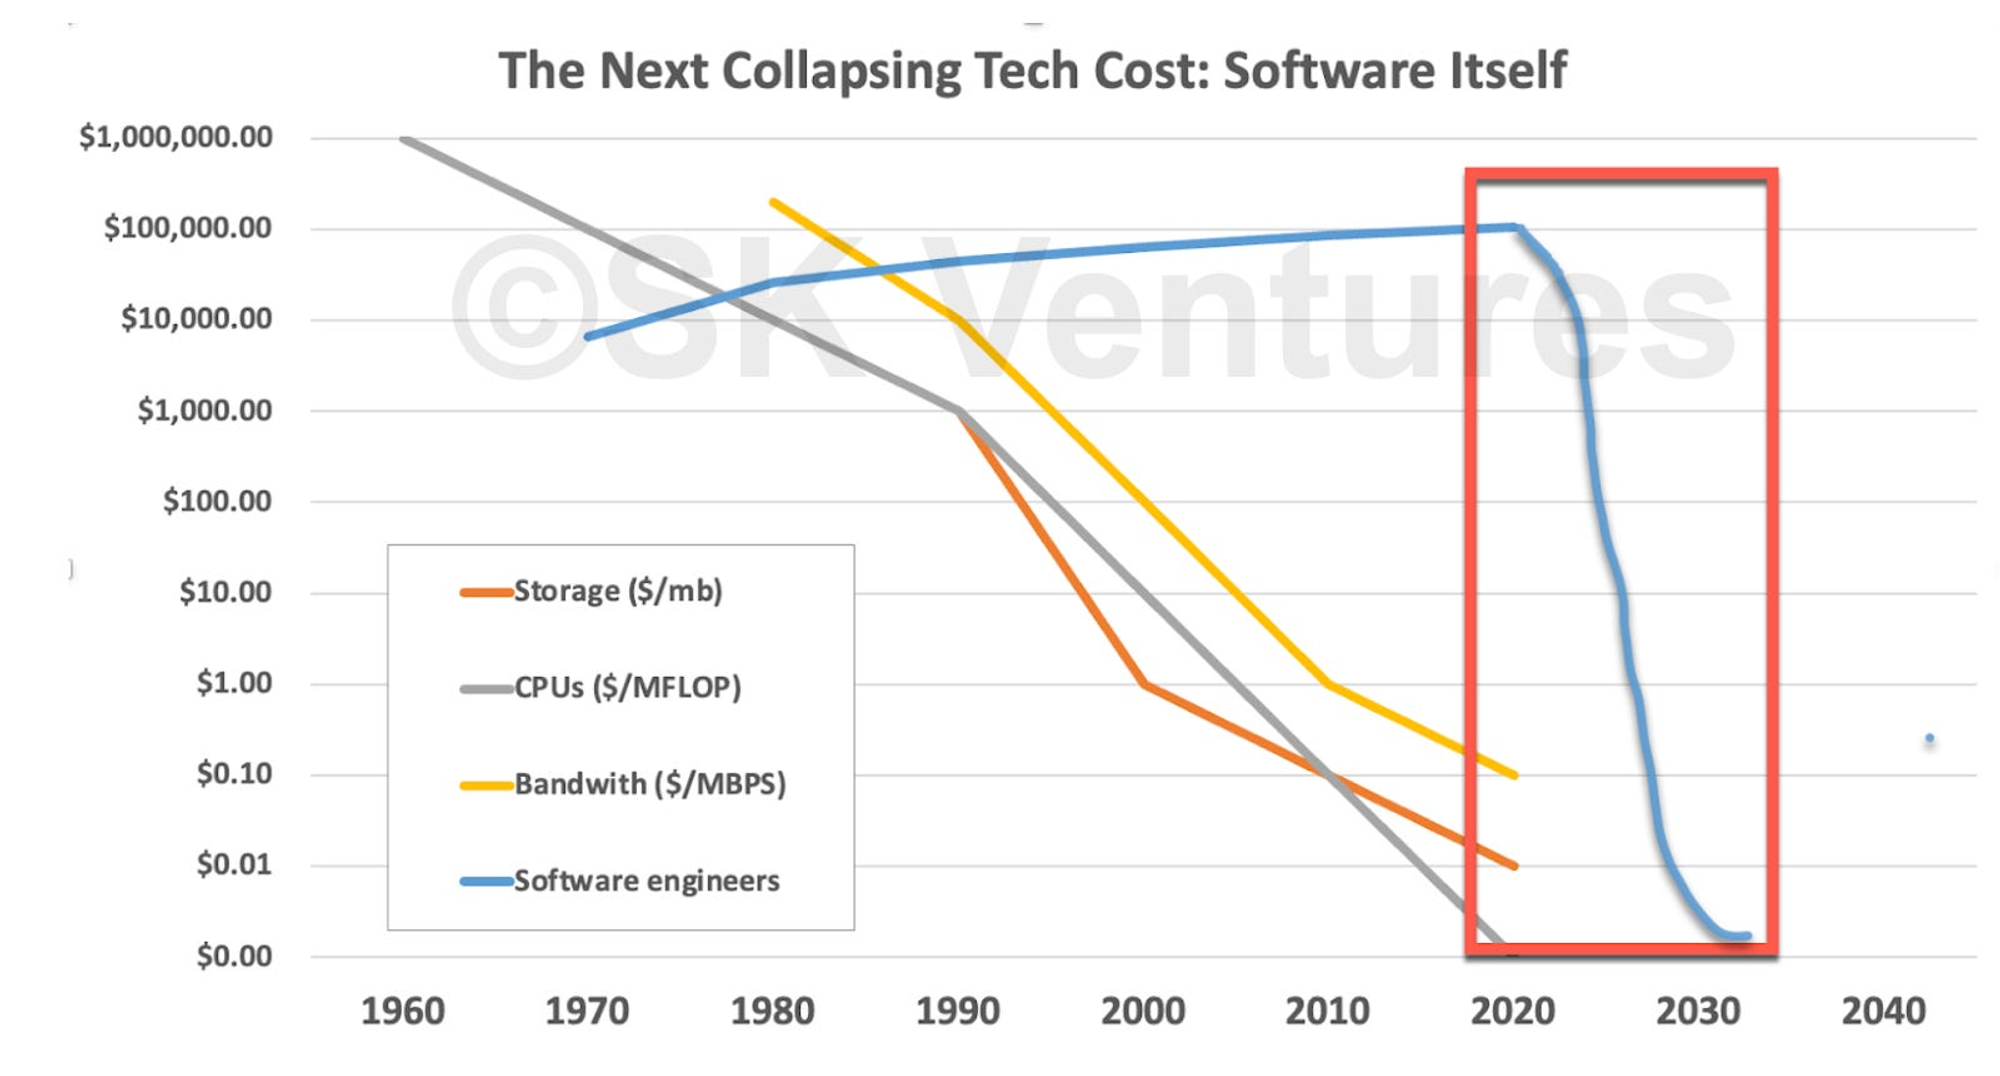 Next collapsing tech cost is software itself